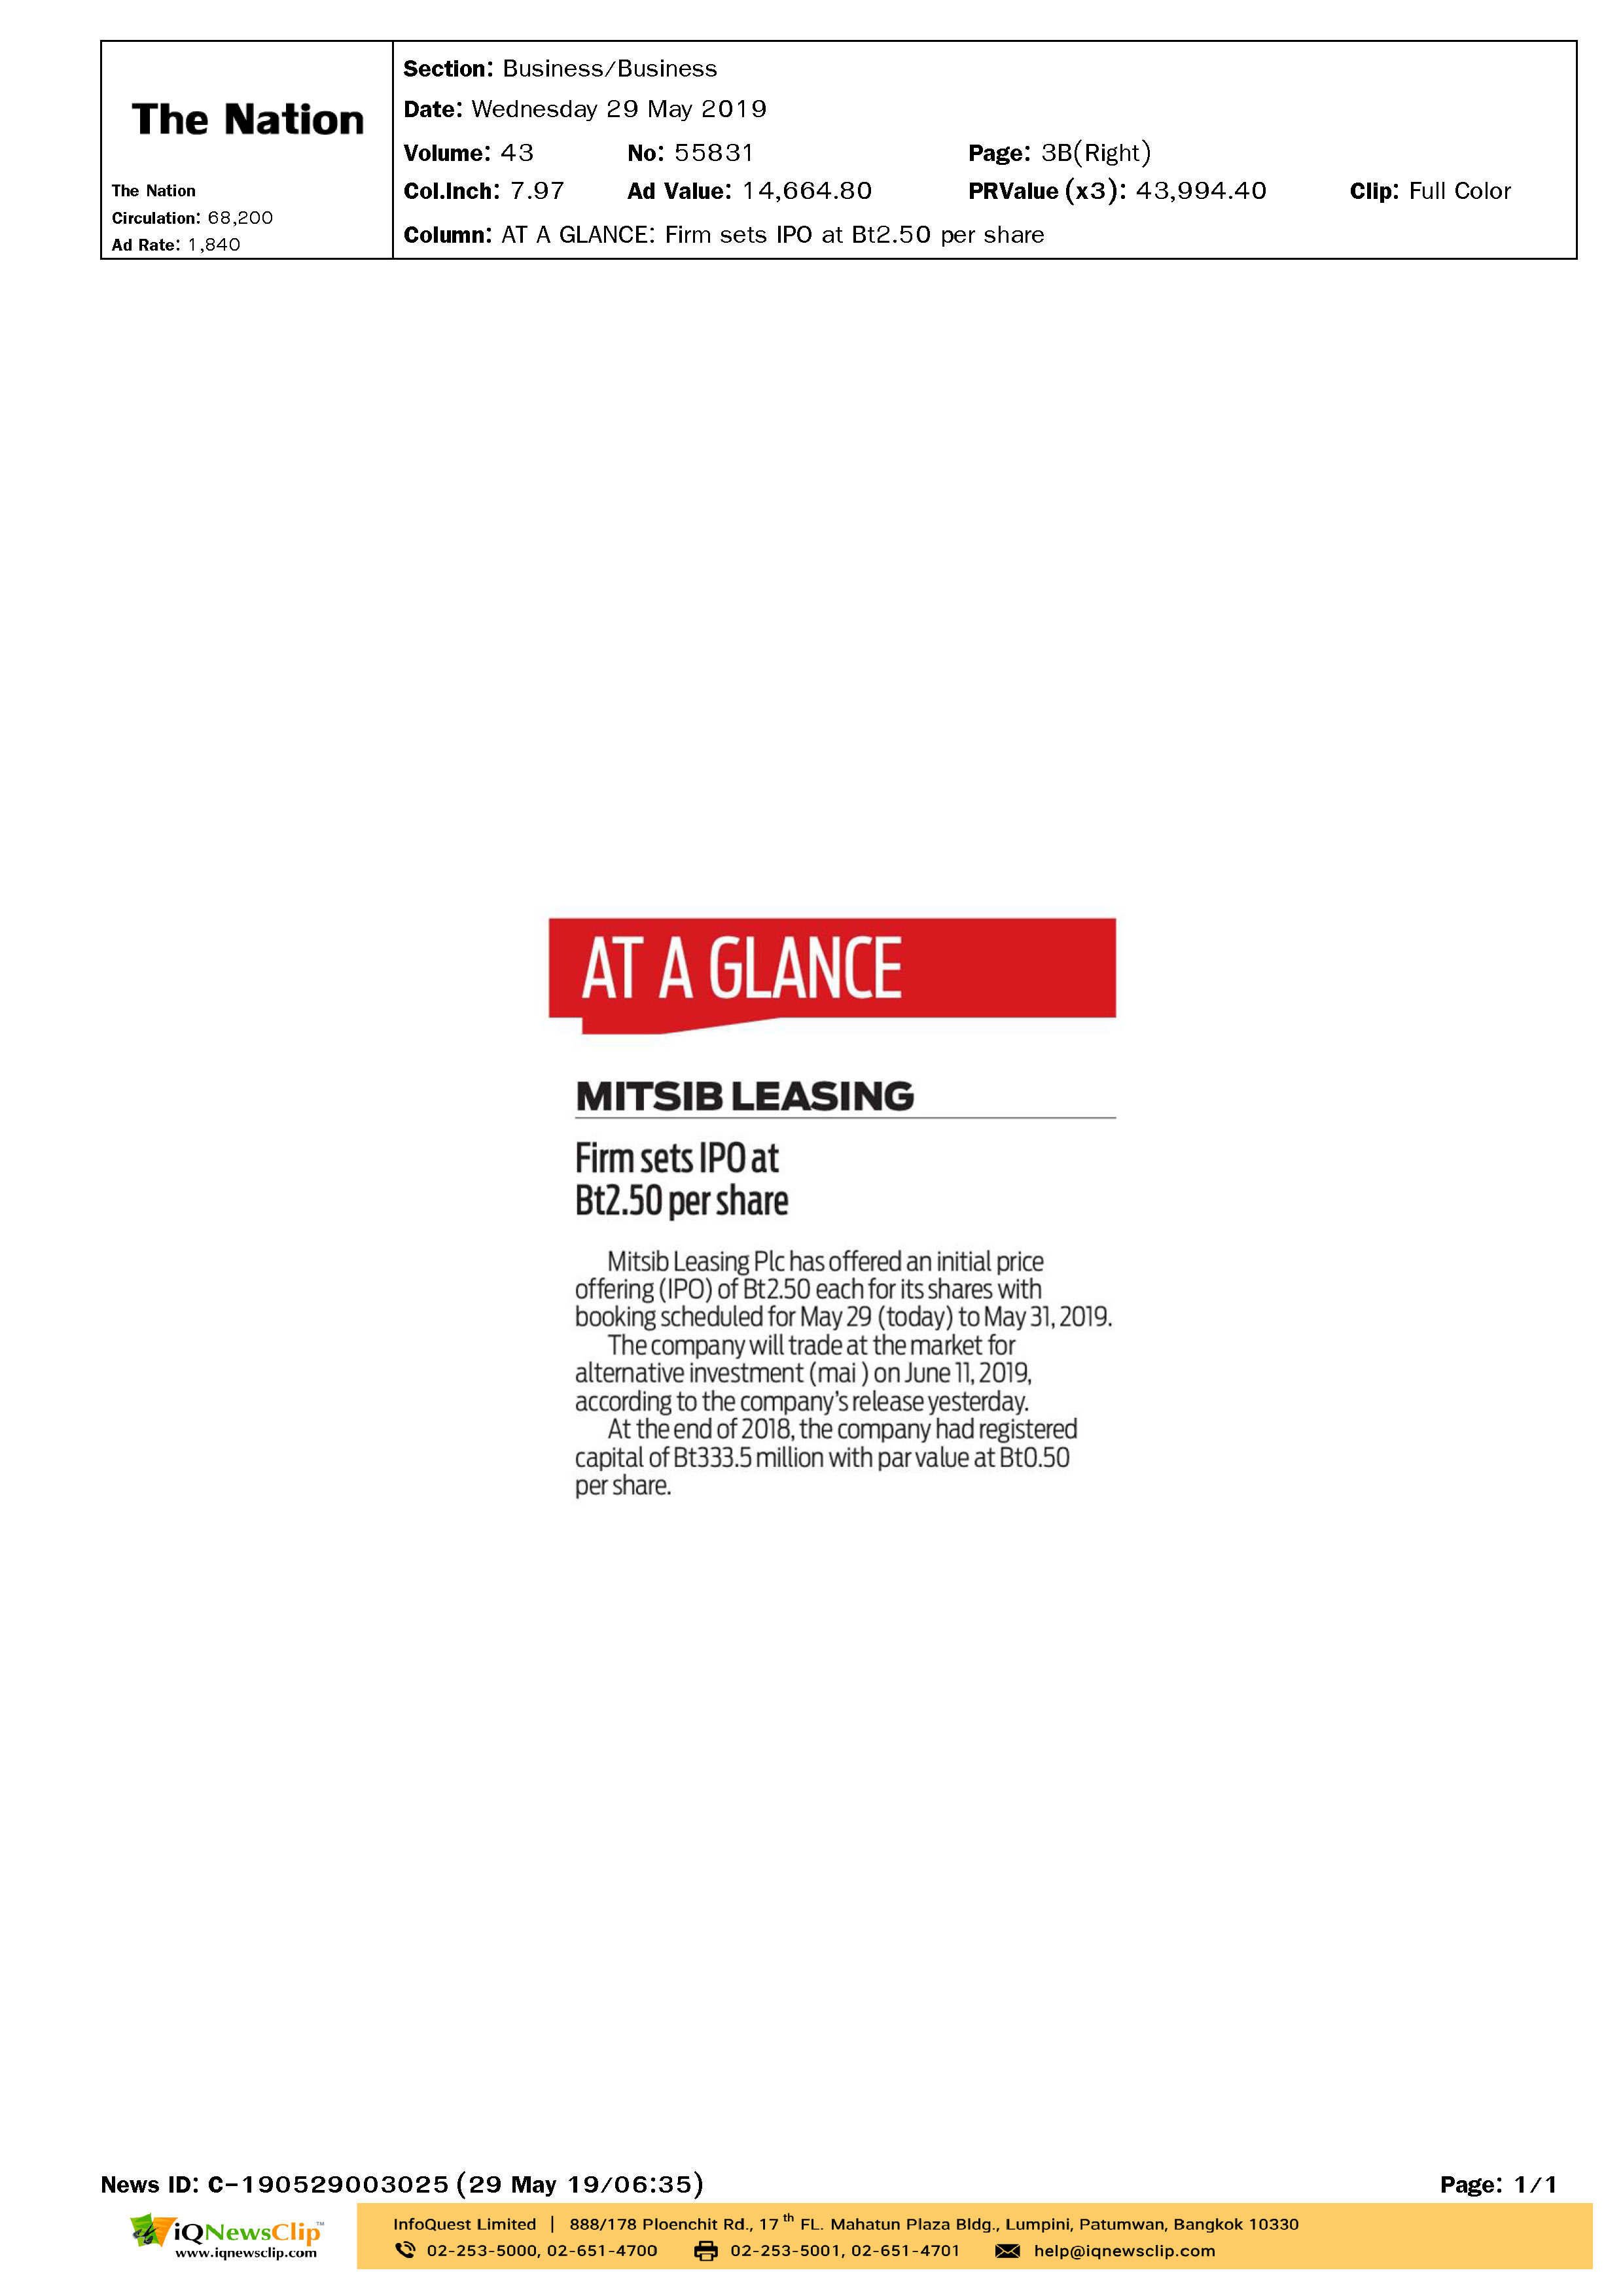 The Nation AT A GLANCE MITSIB LEASING Firm sets IPO at Bt2.50 per share